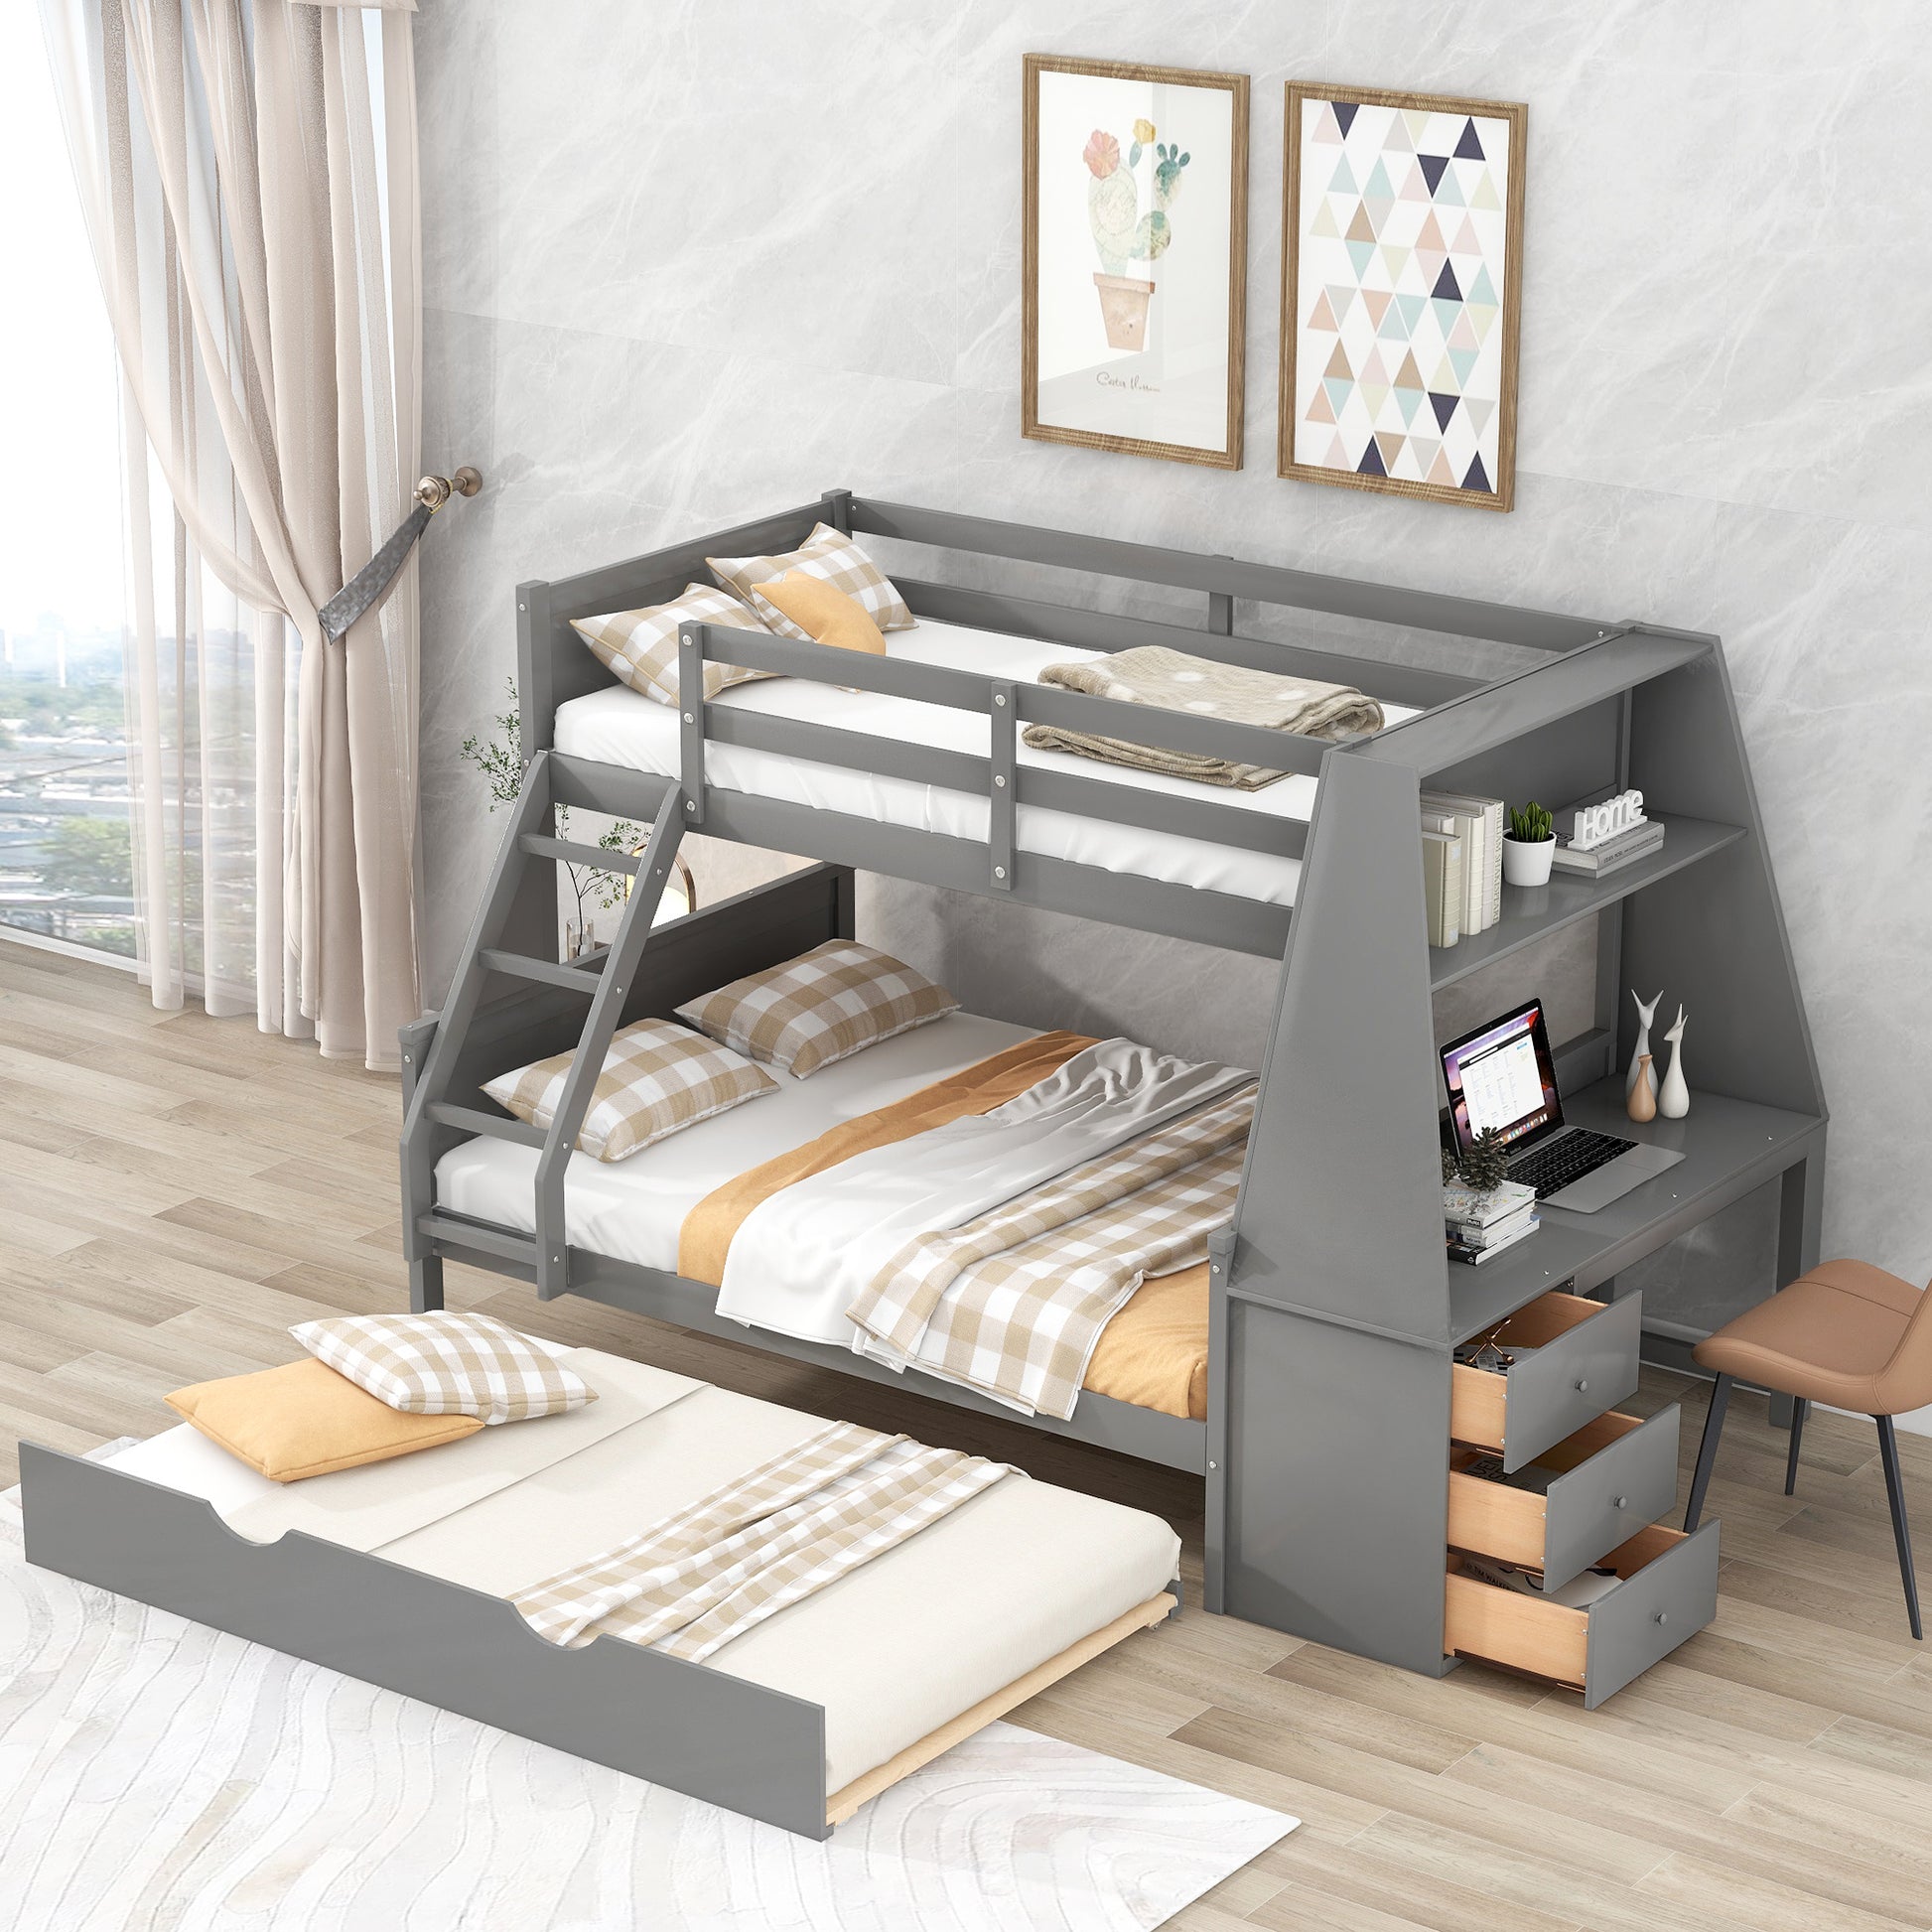 Twin over Full Bunk Bed with Trundle and Built-in Desk, Three Storage Drawers and Shelf,Gray - Enova Luxe Home Store